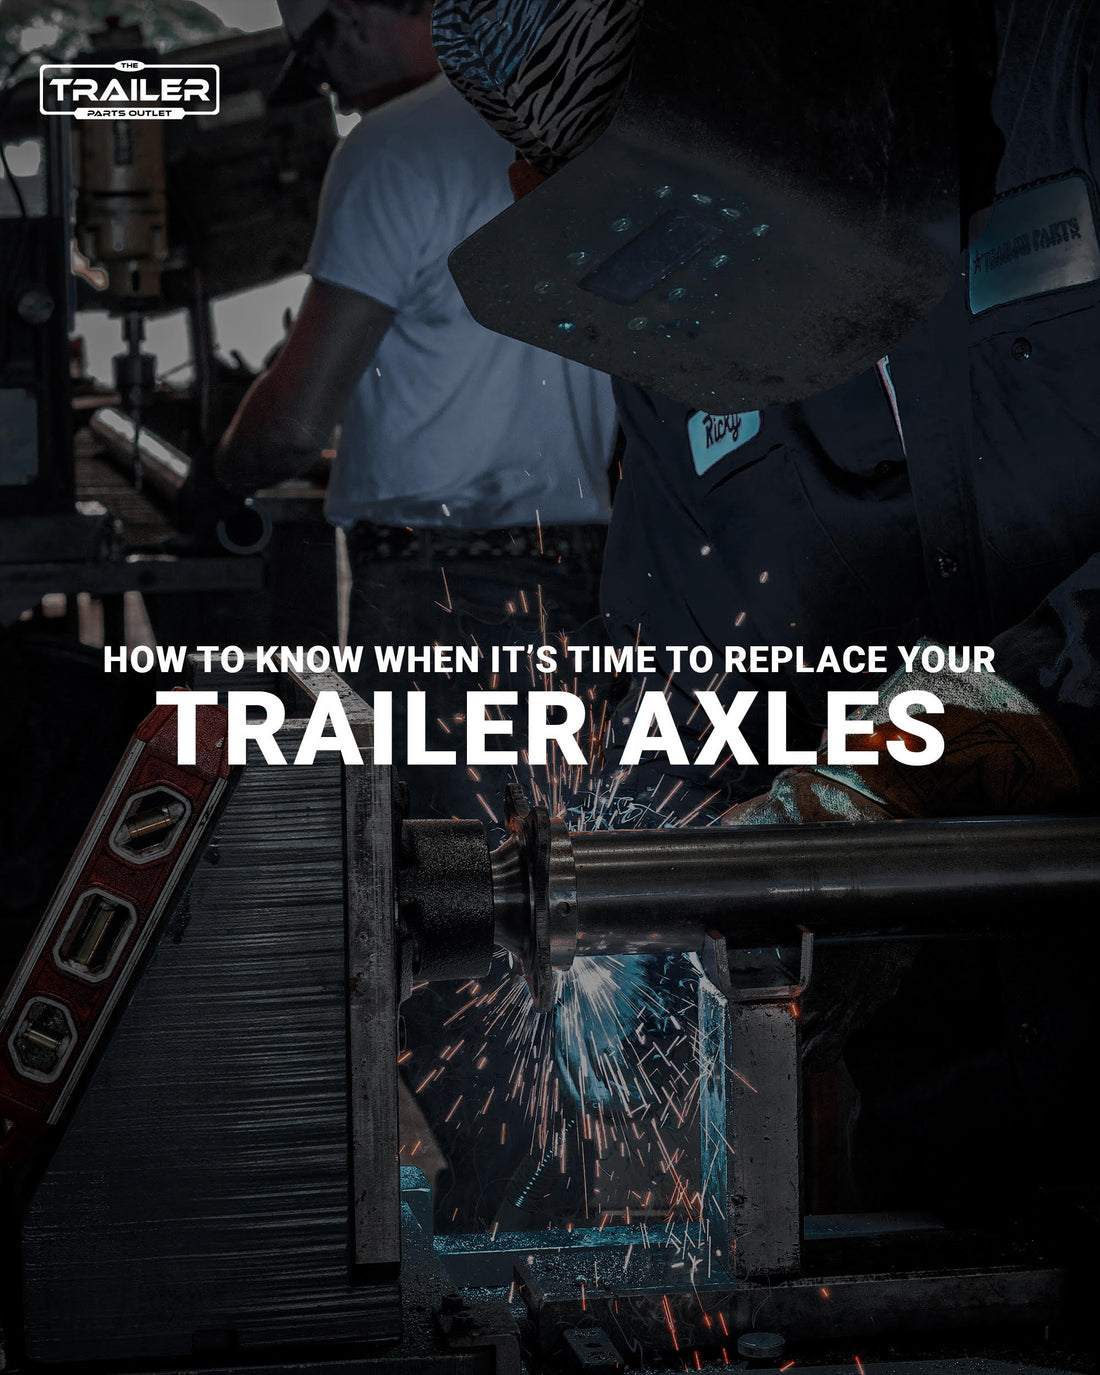 How to Know When It’s Time to Replace Your Trailer Axles